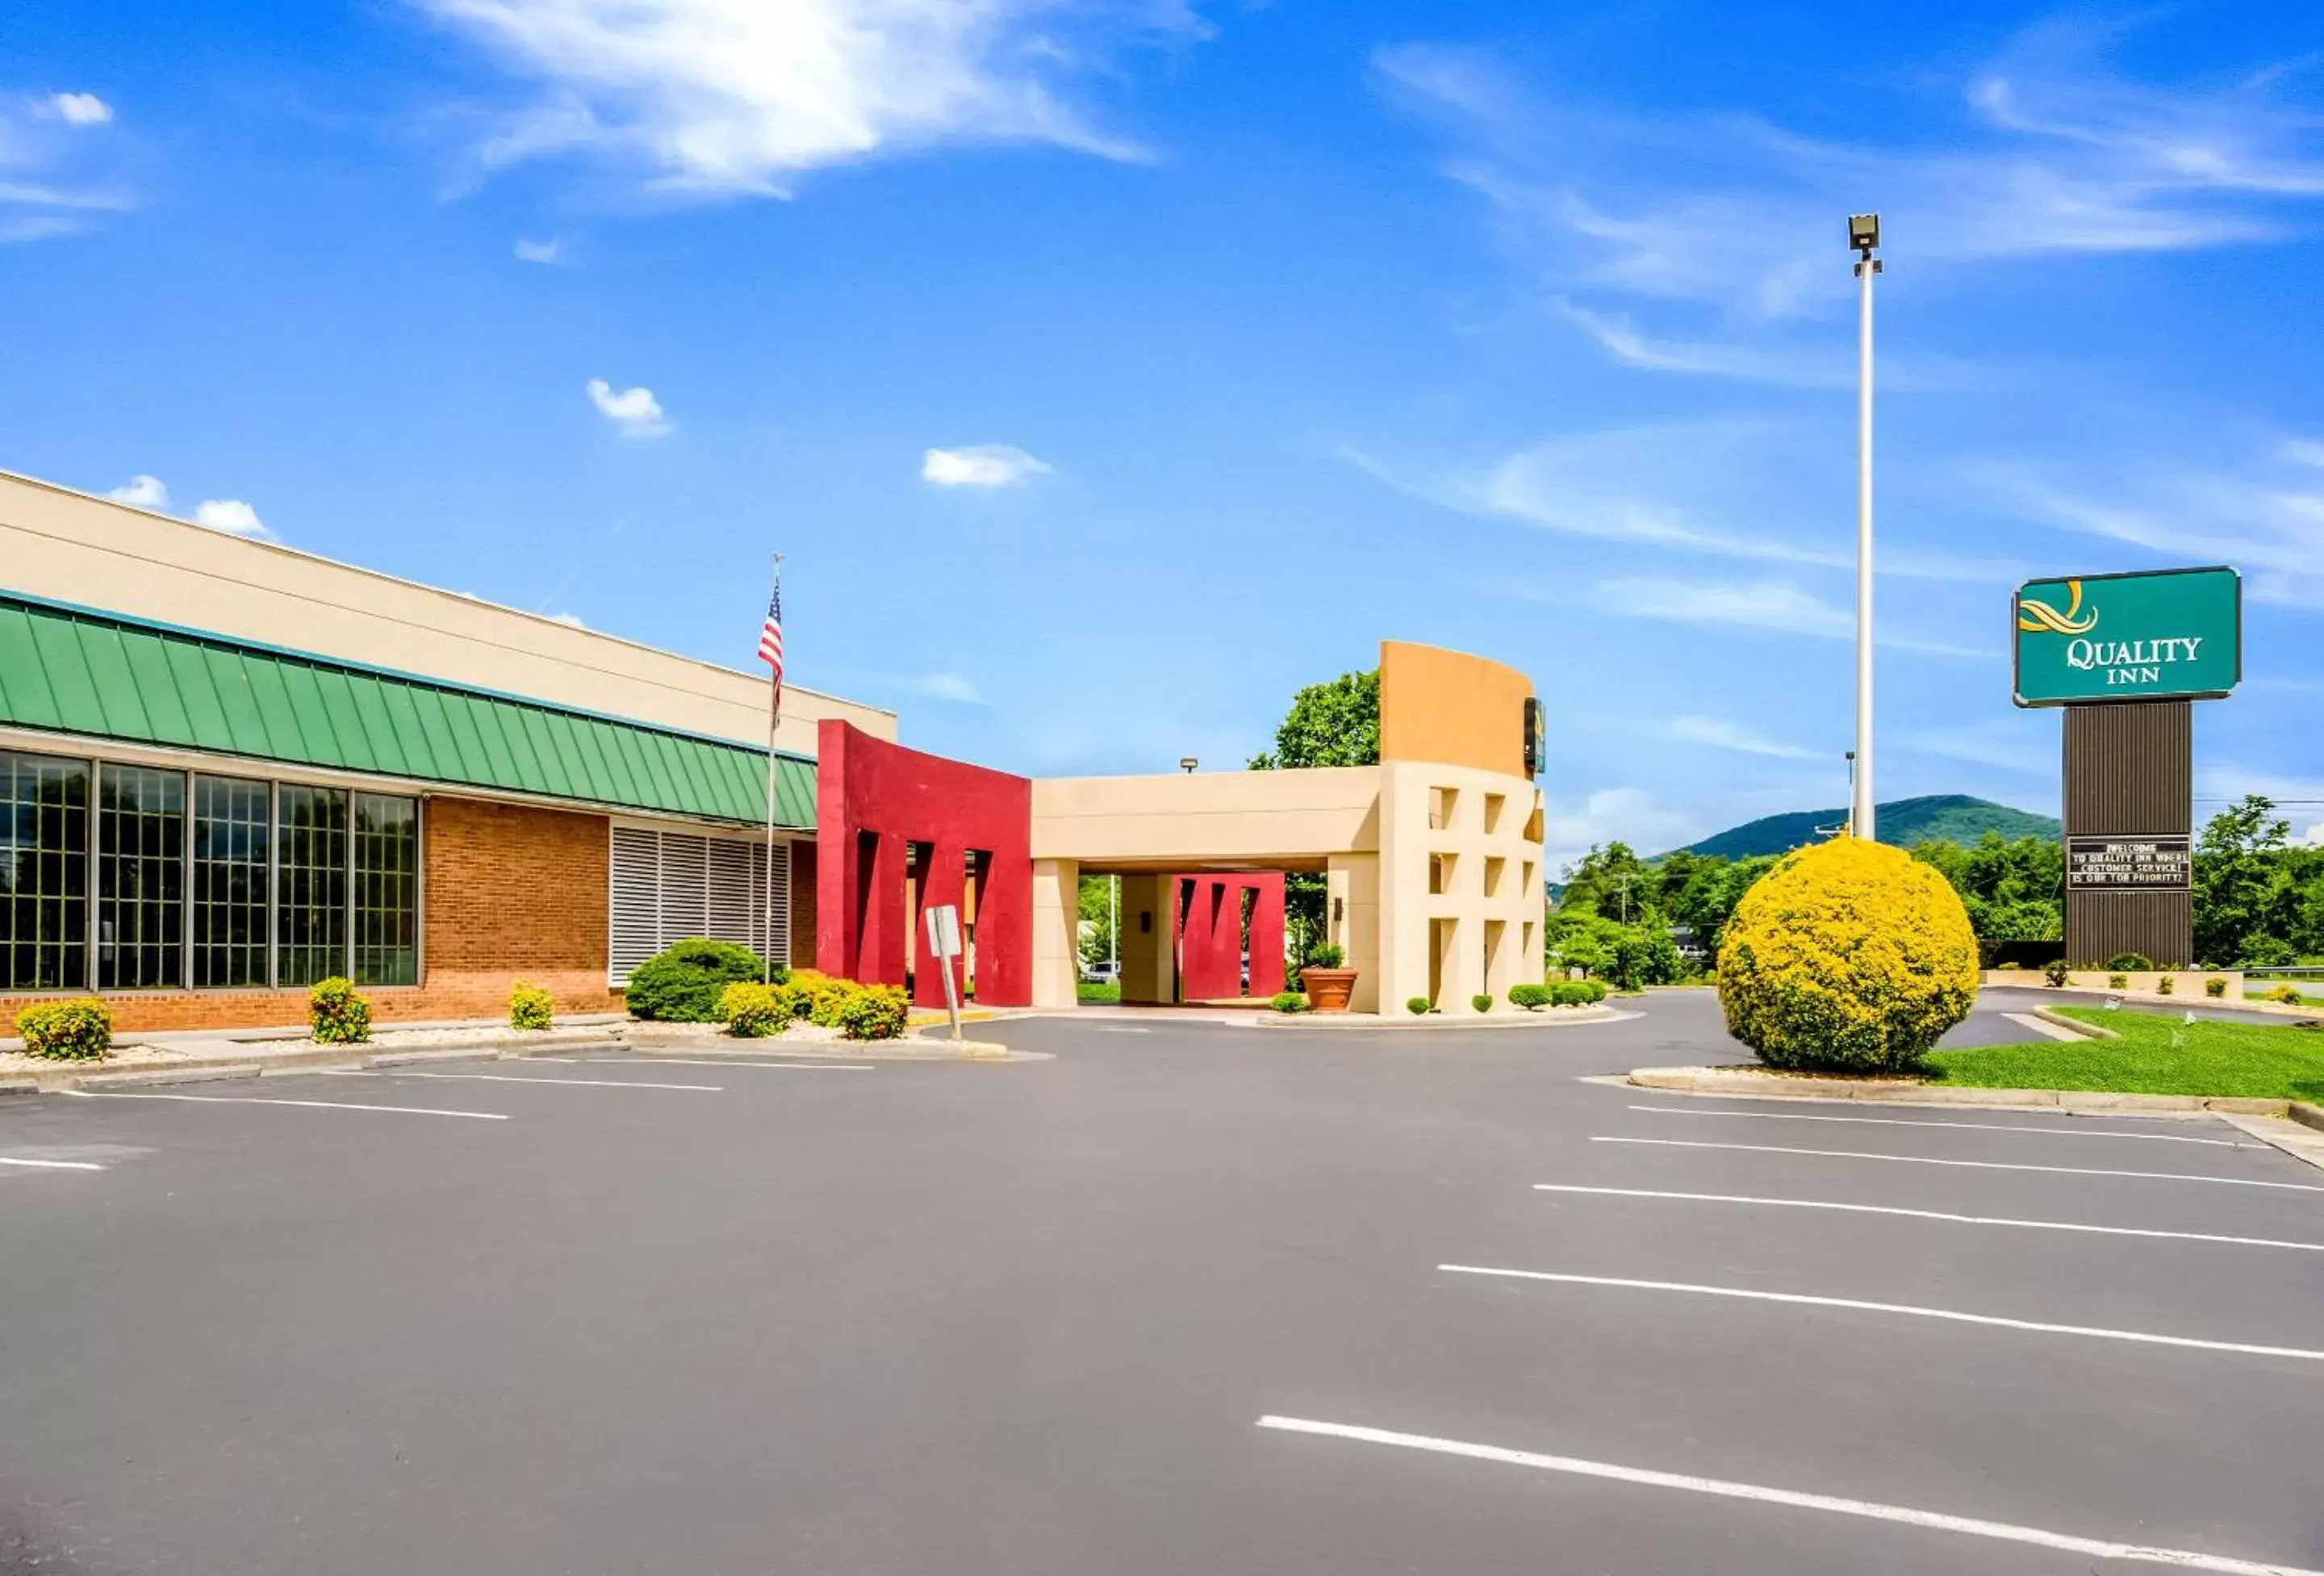 Property Building in Quality Inn Roanoke Airport